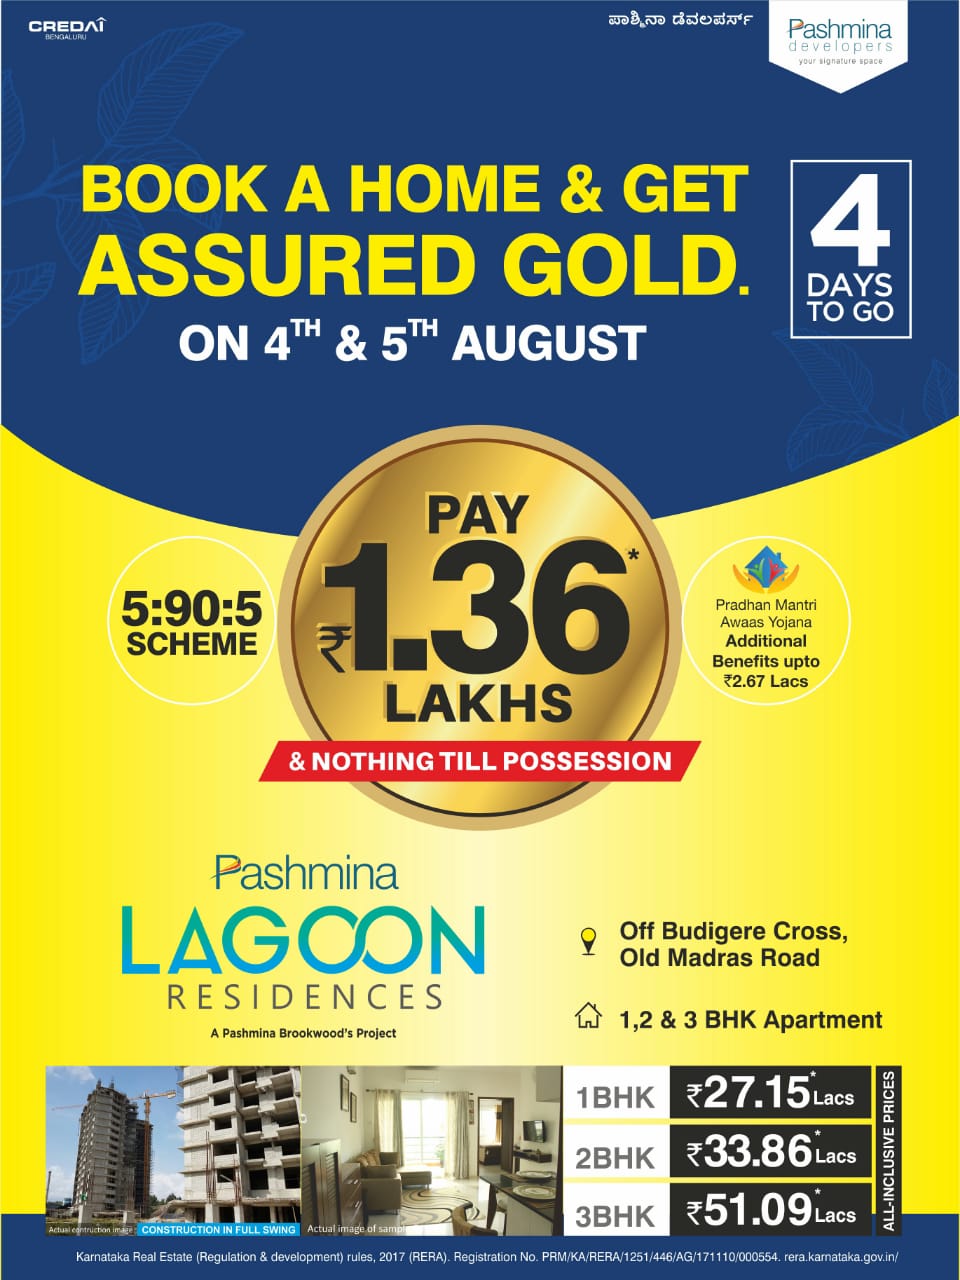 Book a home and get assured gold at Pashmina Lagoon Residences in Bangalore Update